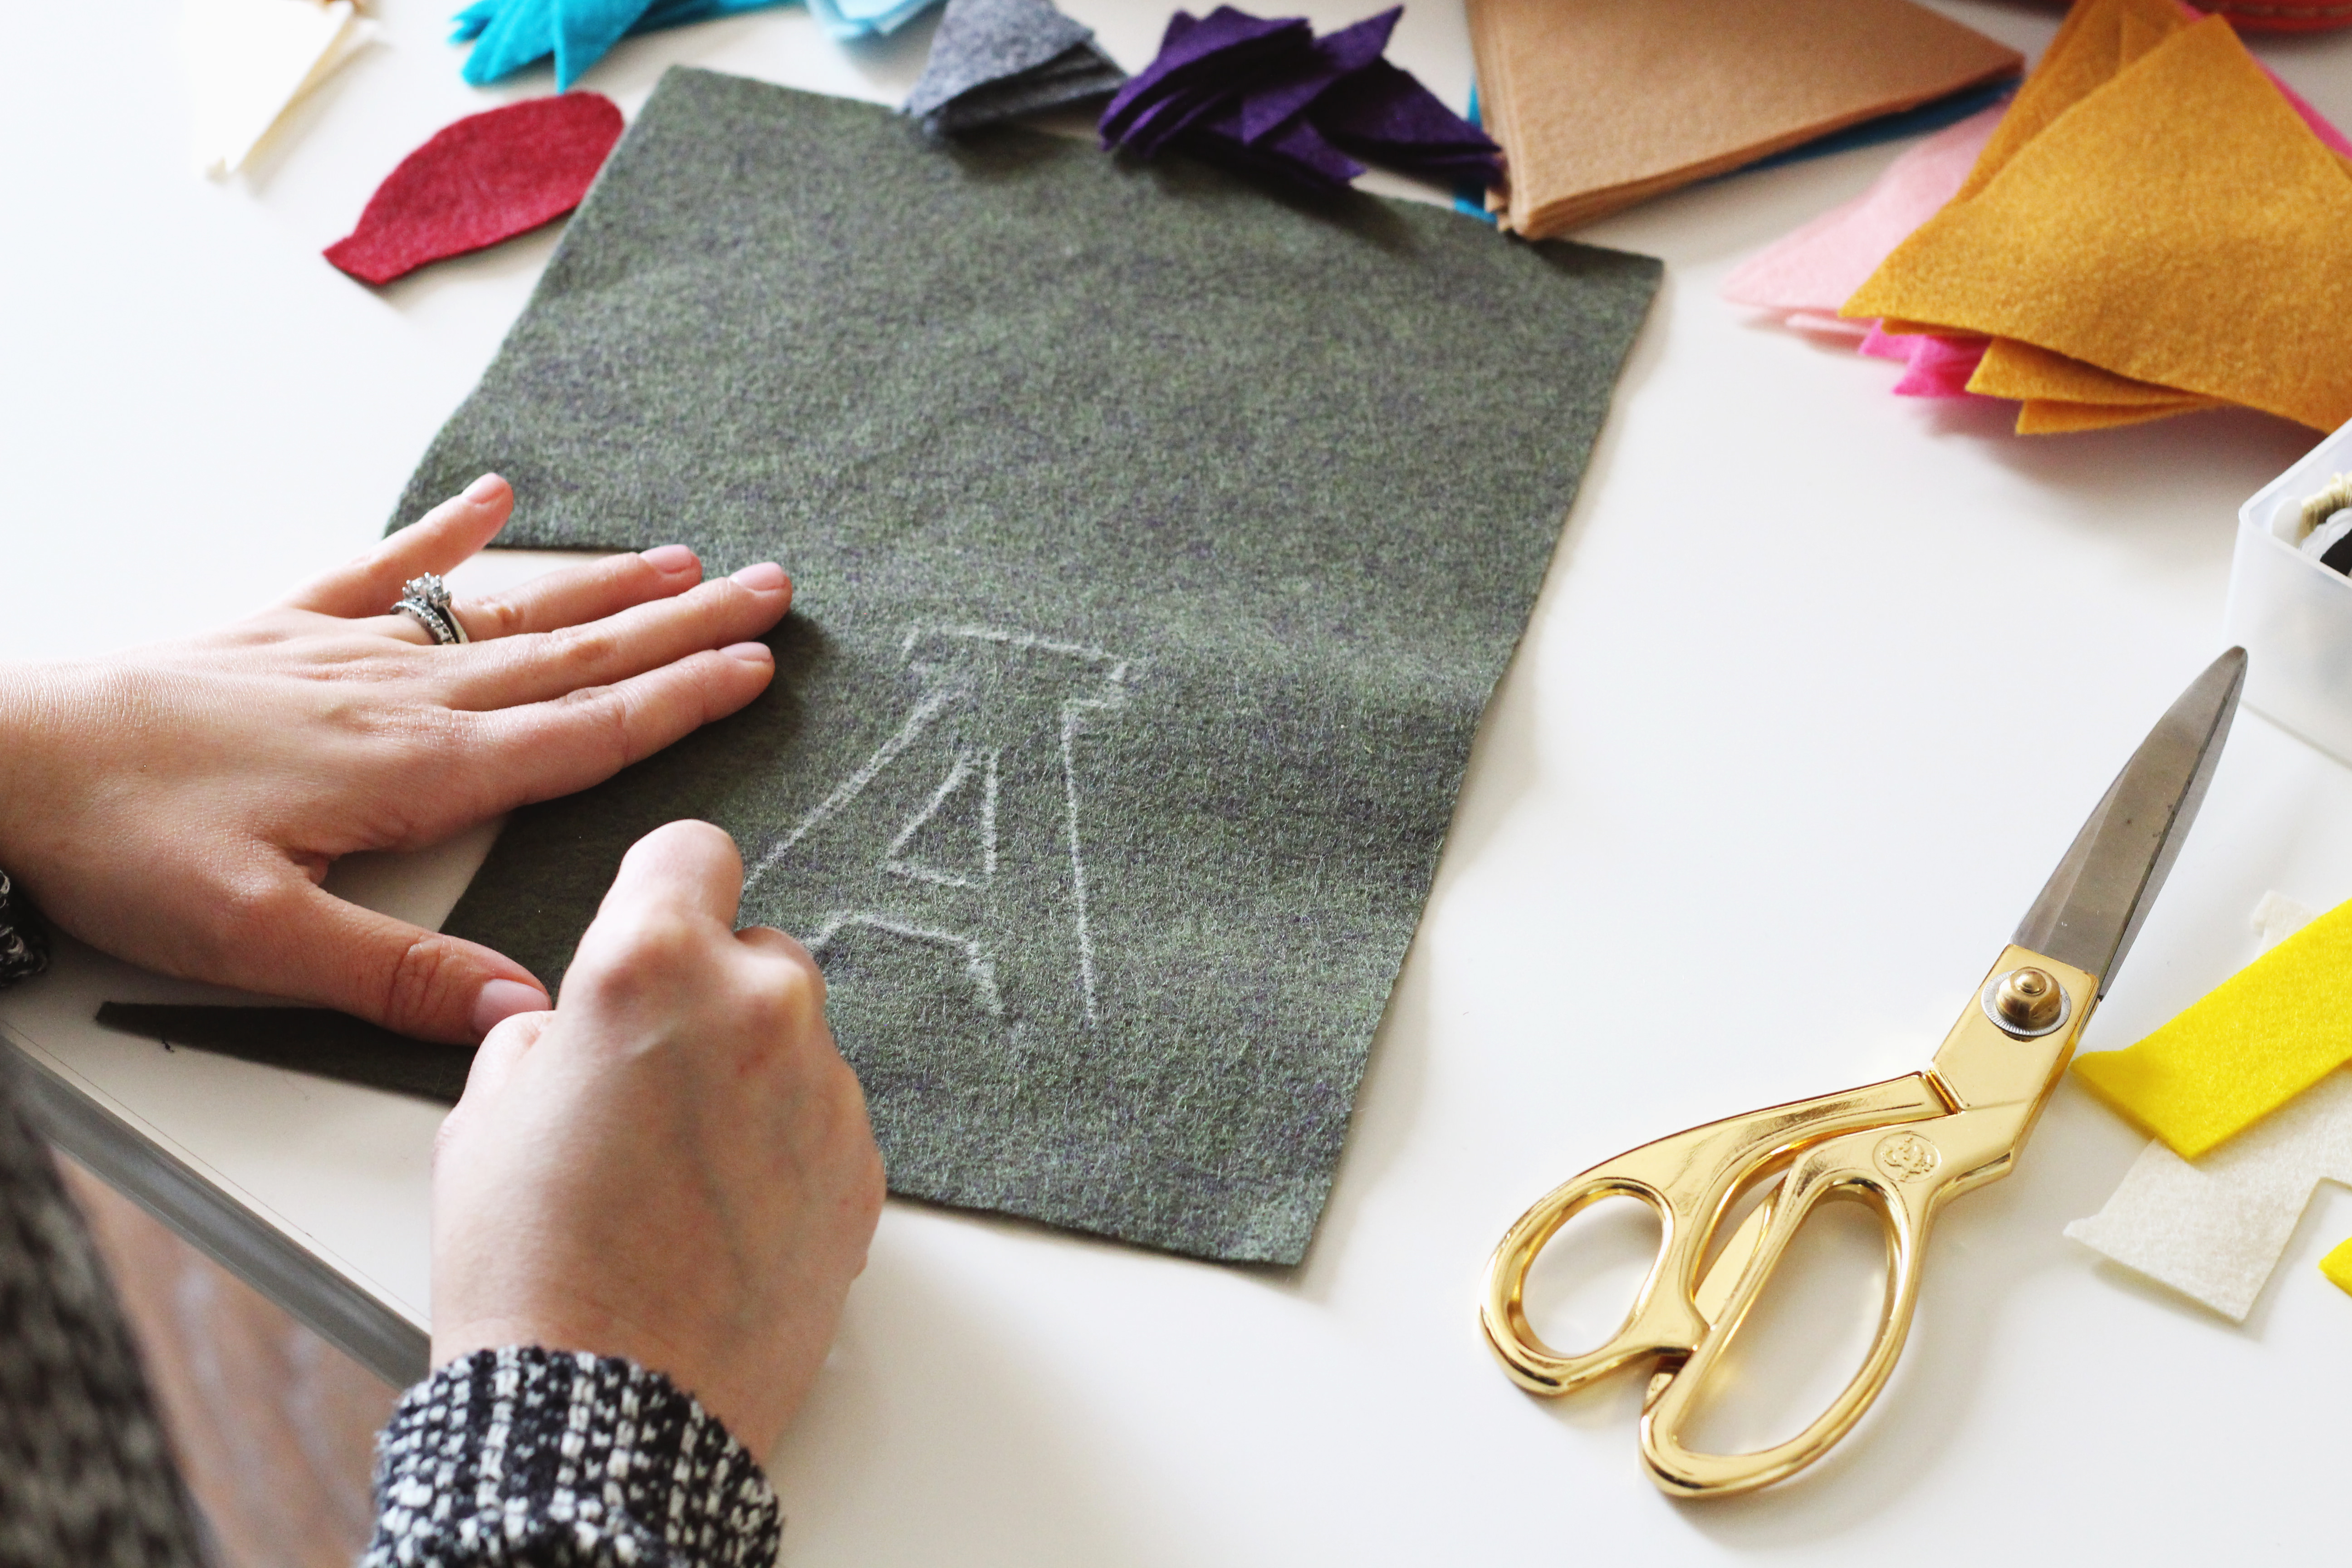 DIY felt letter banners step one: sketch out your letter using chalk